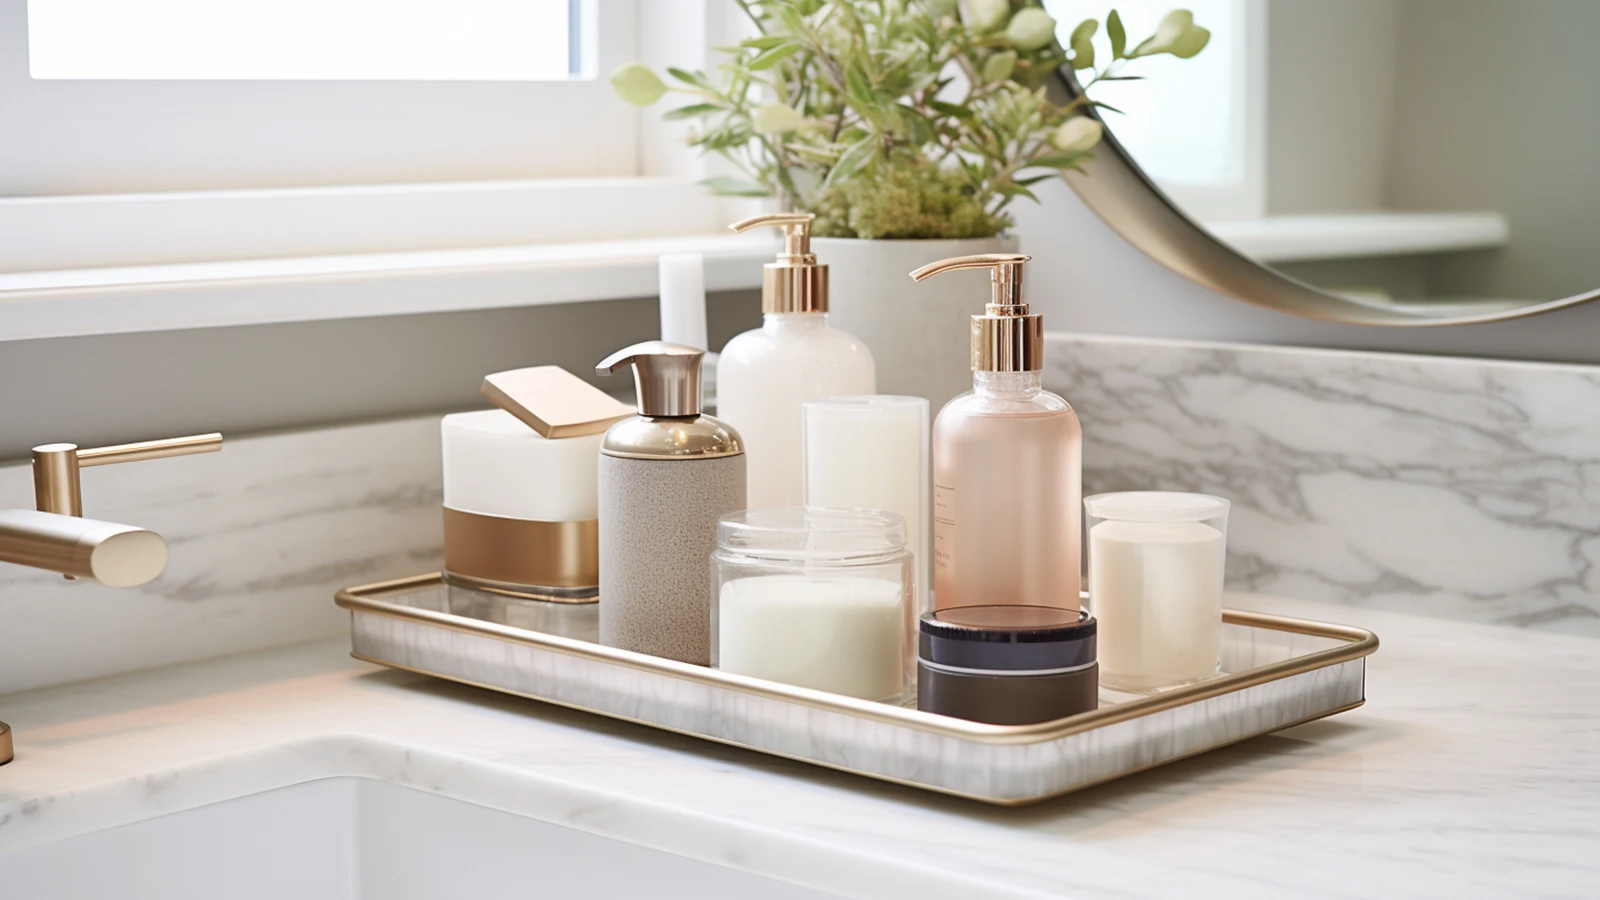 Small bathroom counter decorating ideas: a bathroom with a tray full of soaps and lotions.